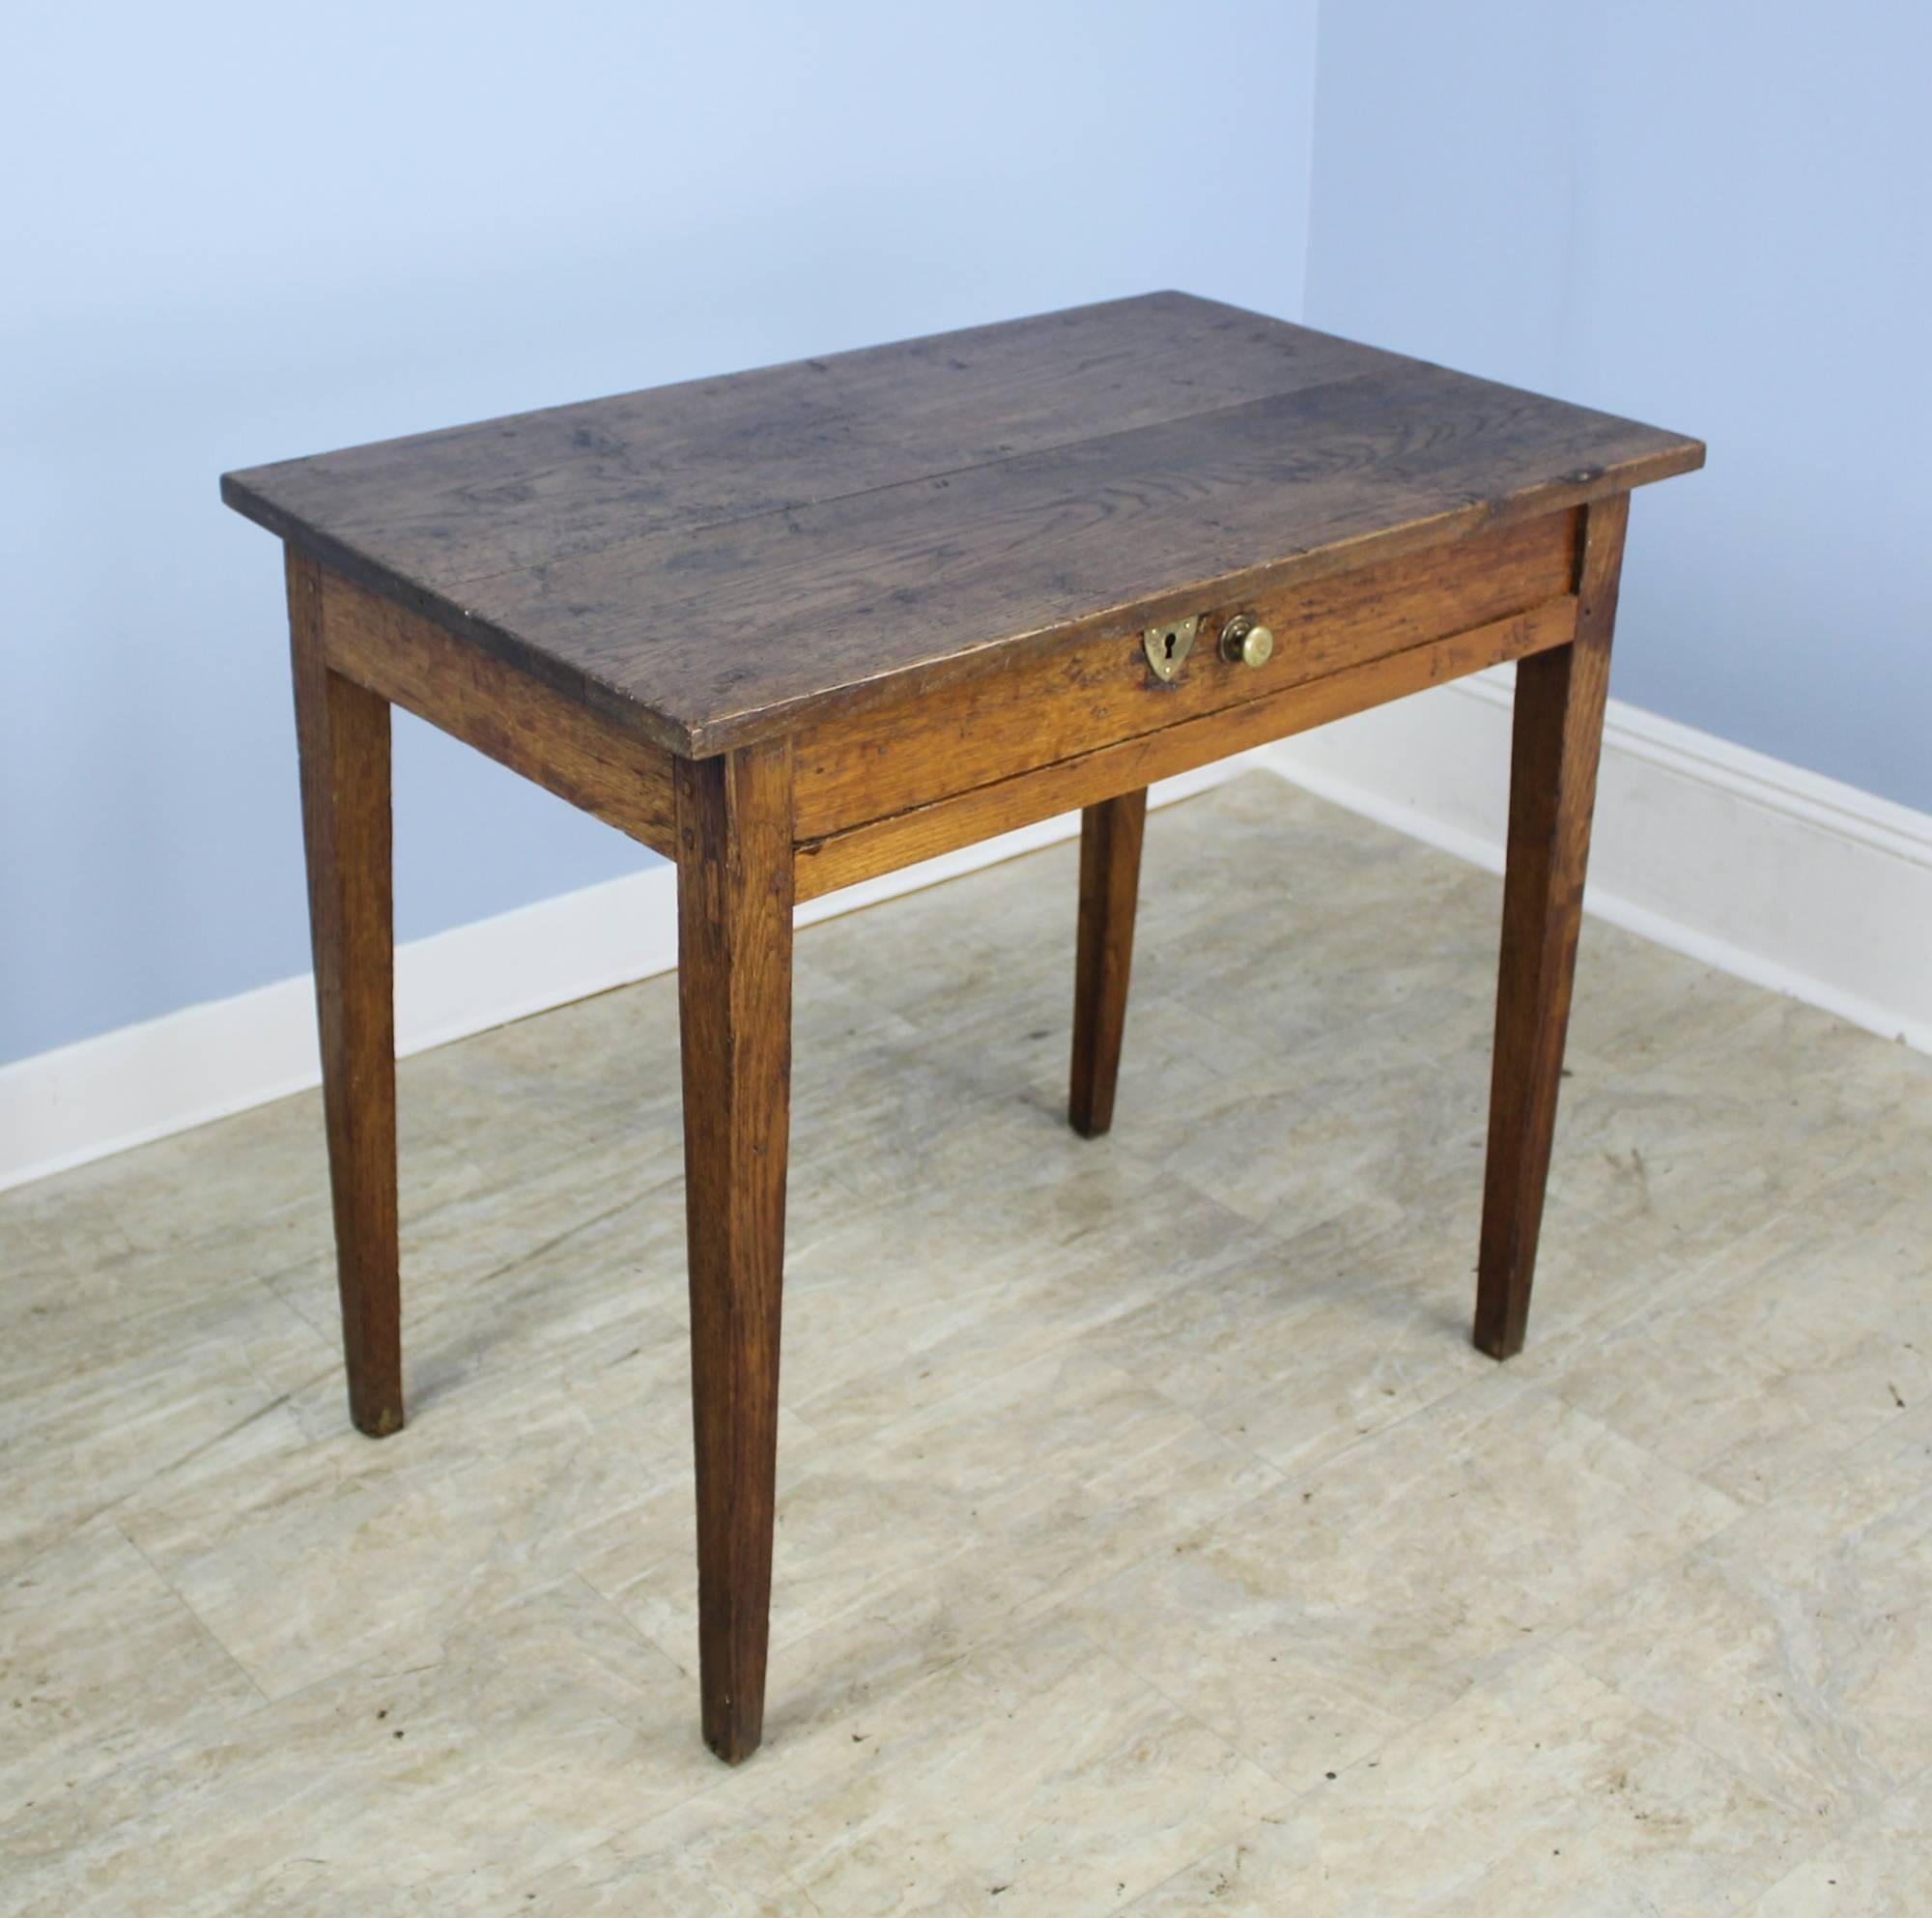 A handsome oak side table with a classic sturdy silhouette and well grained top. The wide single drawer with brass knob adds a note of drama, as does the brass keyhole.